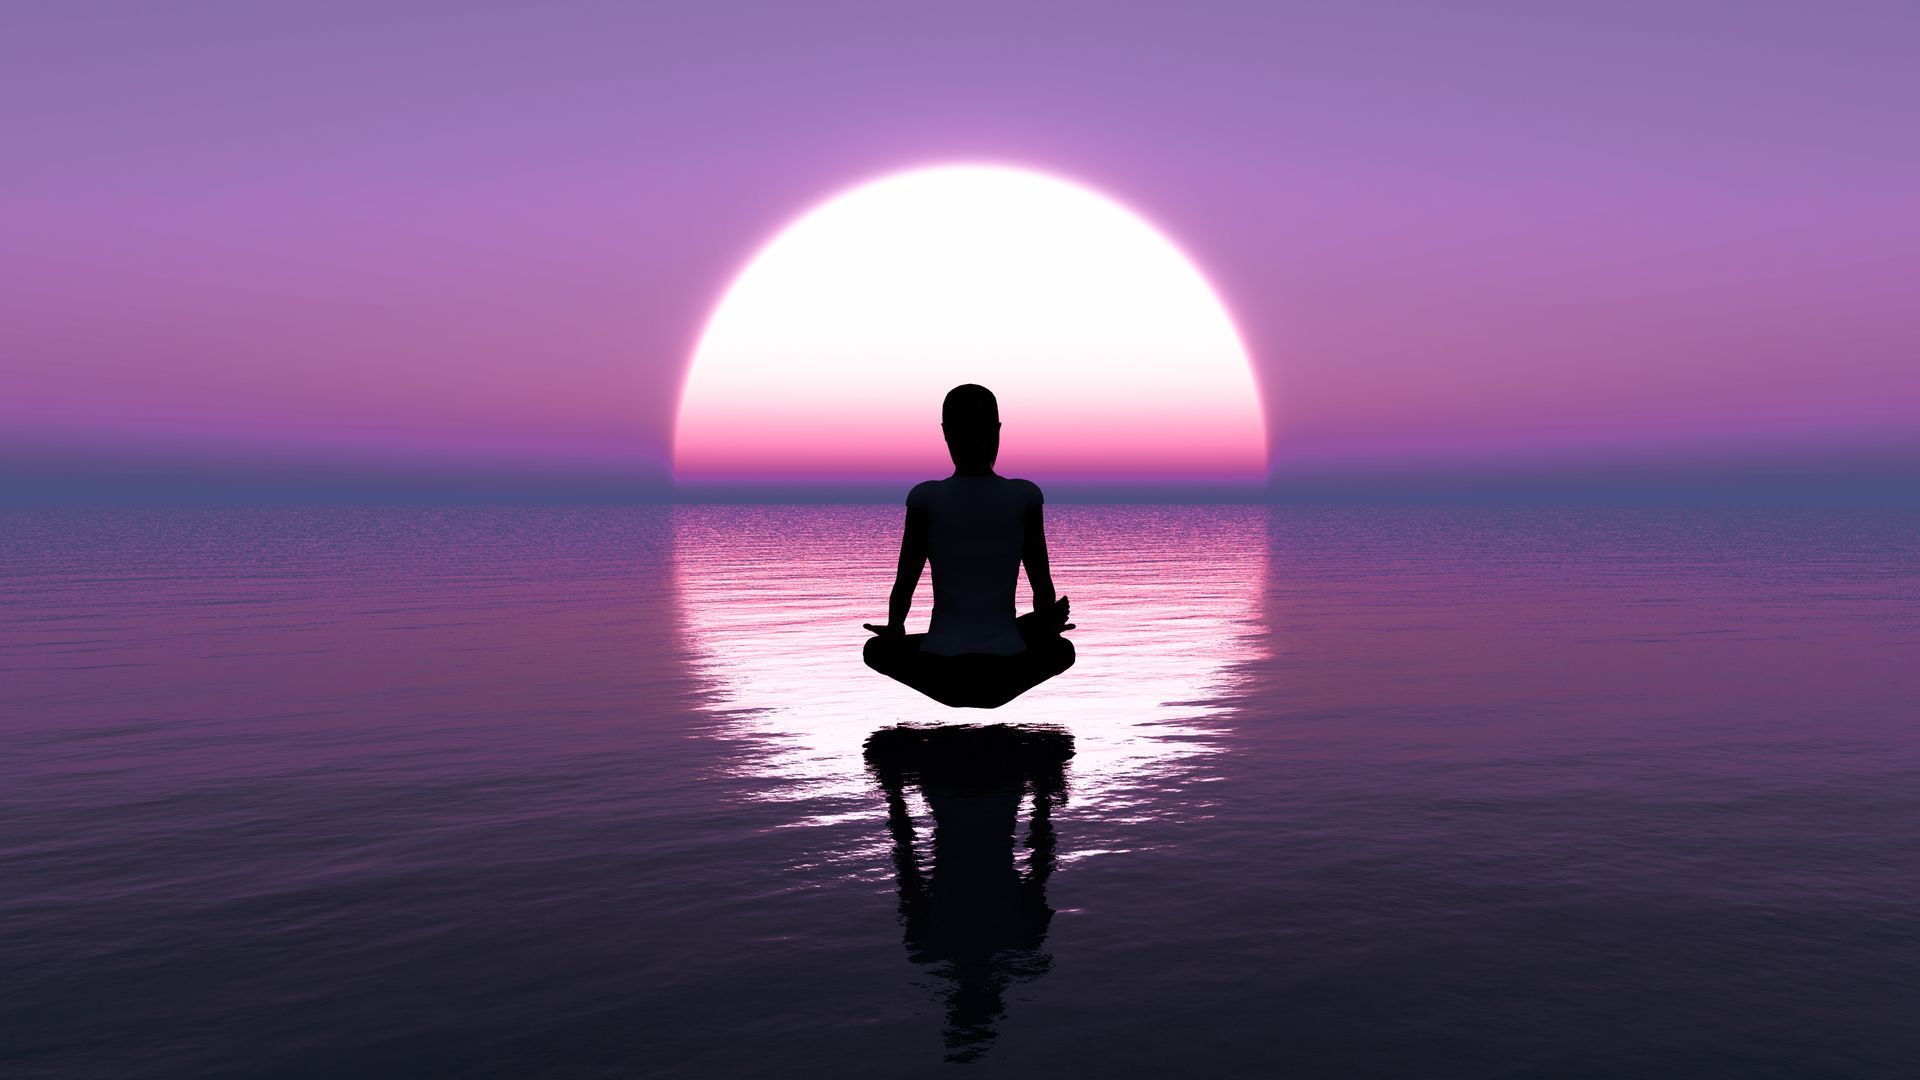 A person is meditating in the ocean at sunset.